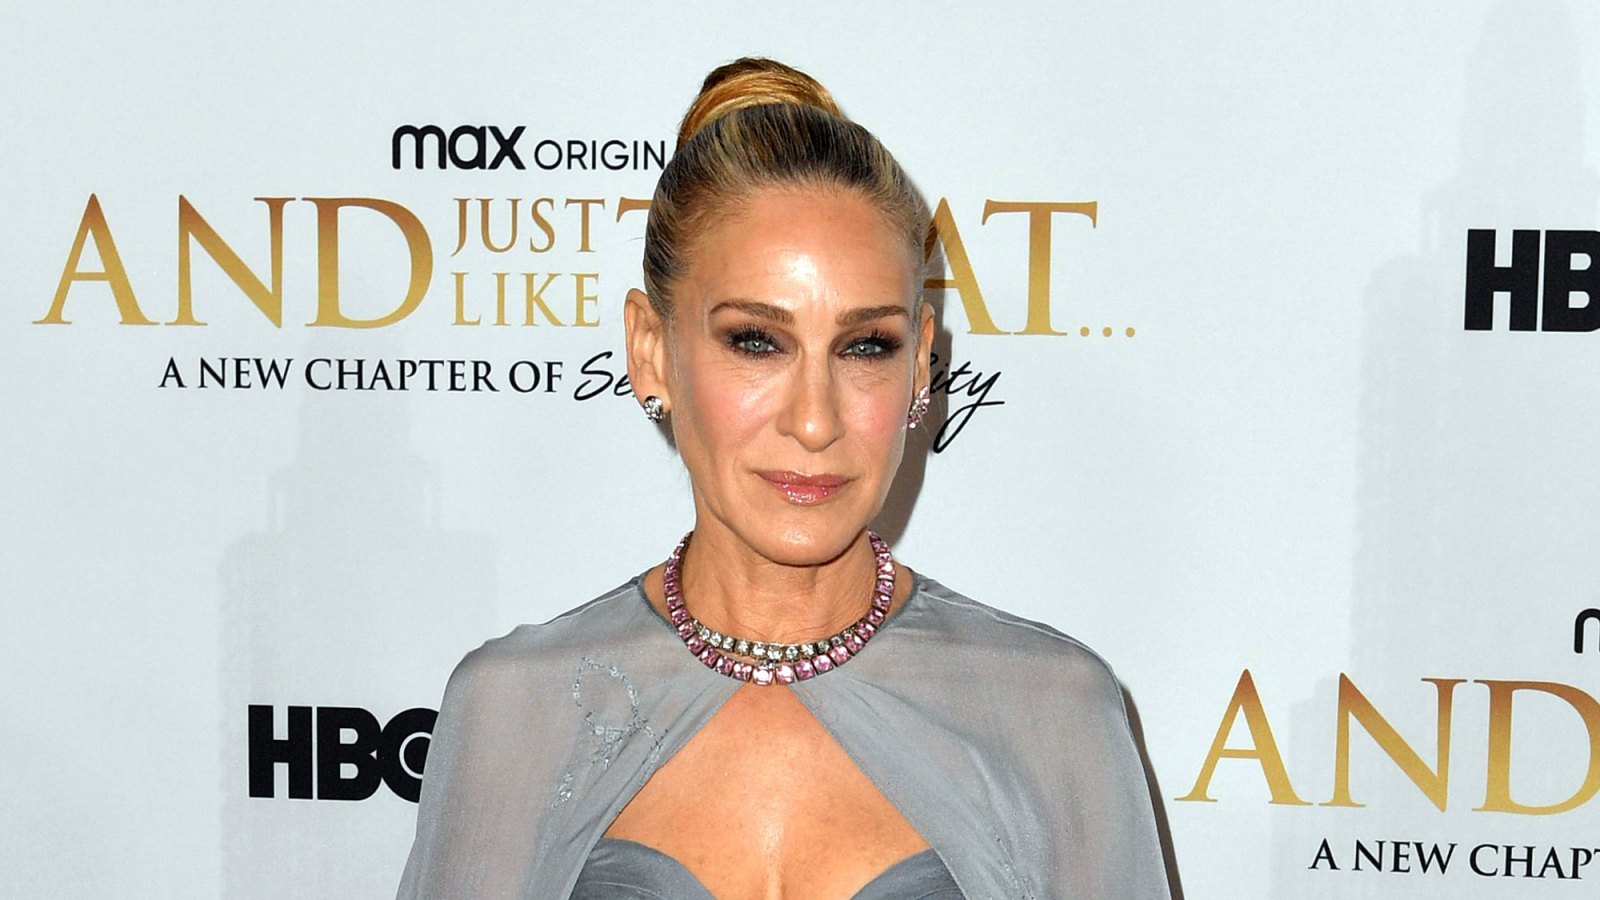 Sarah Jessica Parker Closes SJP's NYC Flagship Until Further Notice Due to Omicron Surge